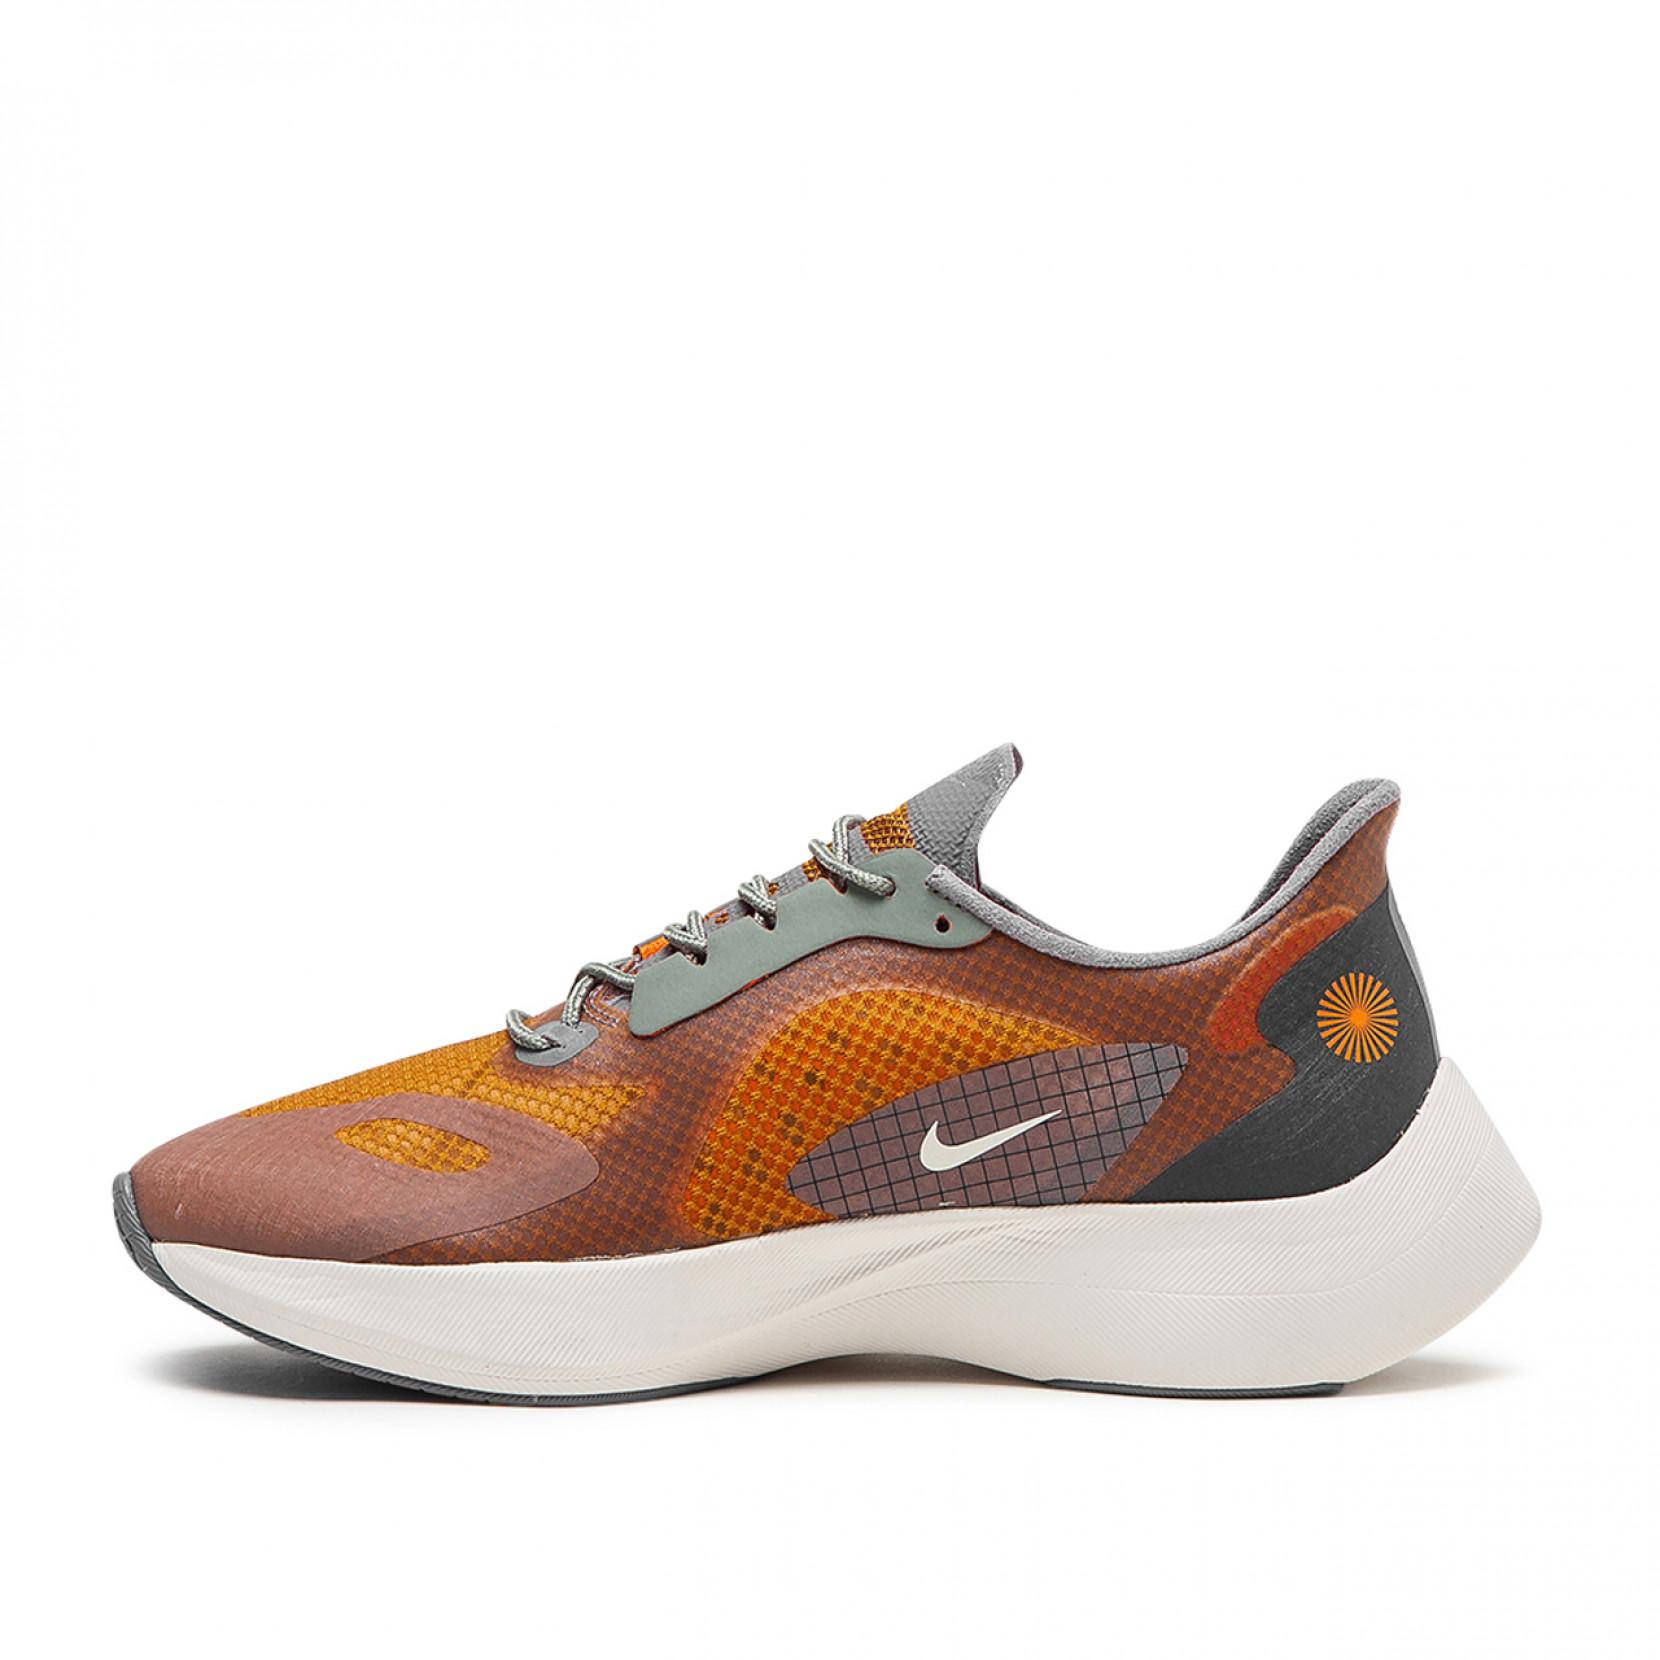 Nike Synthetic Nike Vapor Street Peg Sp in Brown for Men - Save 42% - Lyst